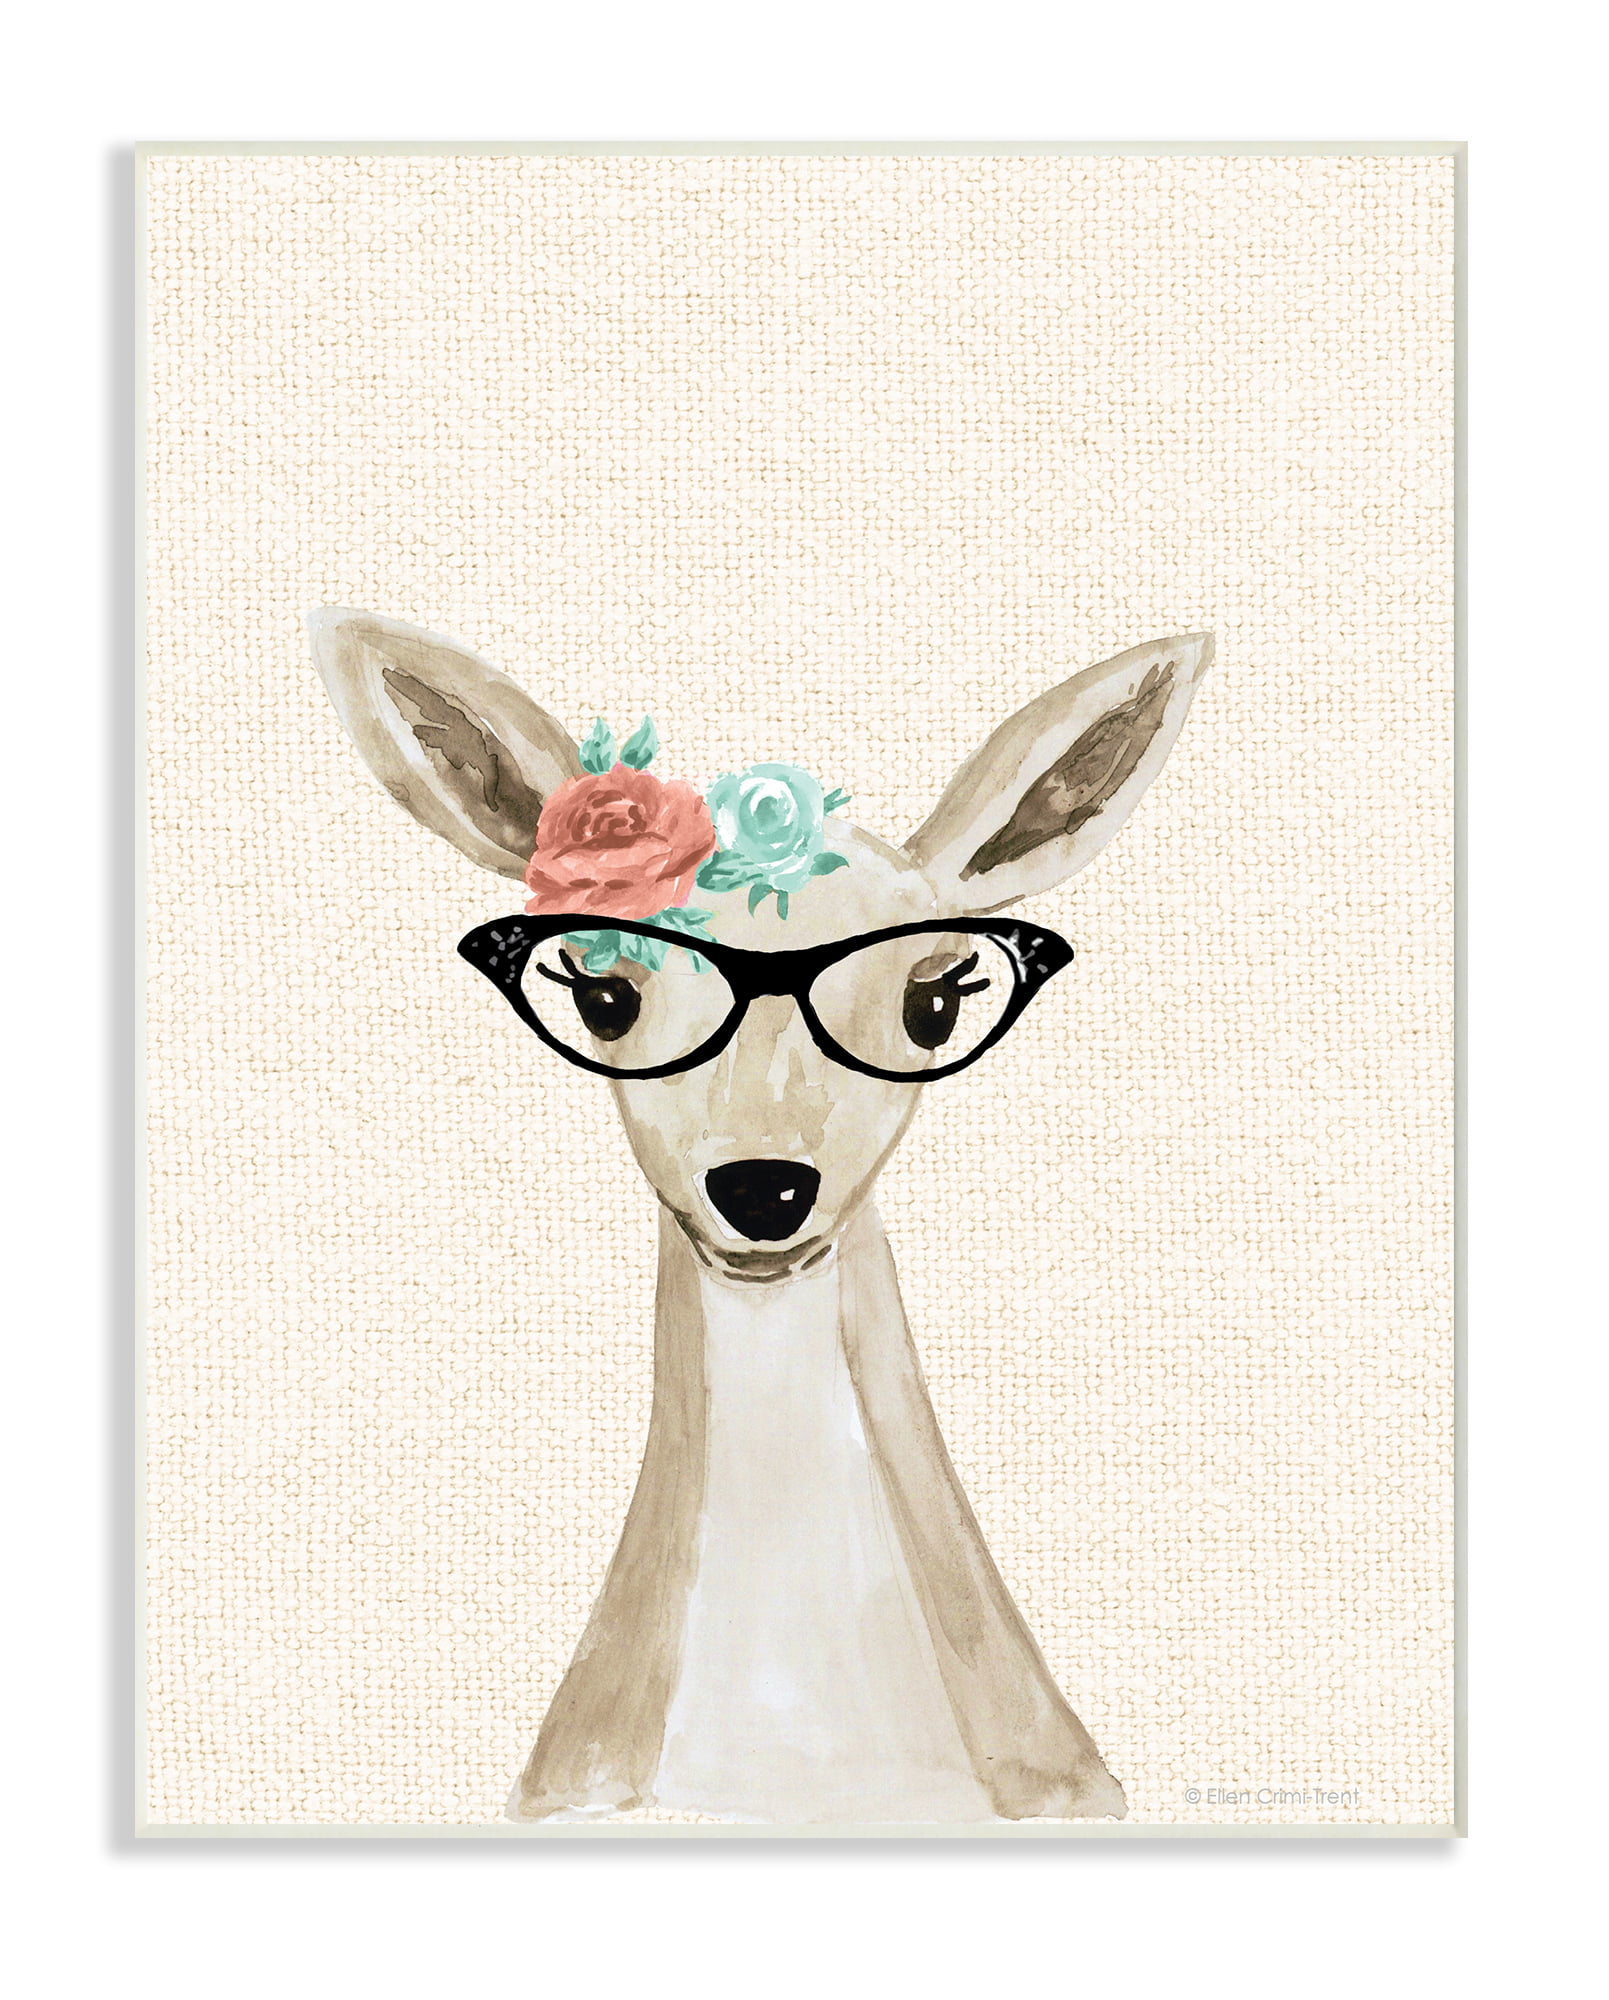 10 x 0.5 x 15 Proudly Made in USA The Kids Room by Stupell Woodland Deer with Cat Eye Glasses Wall Plaque Art 